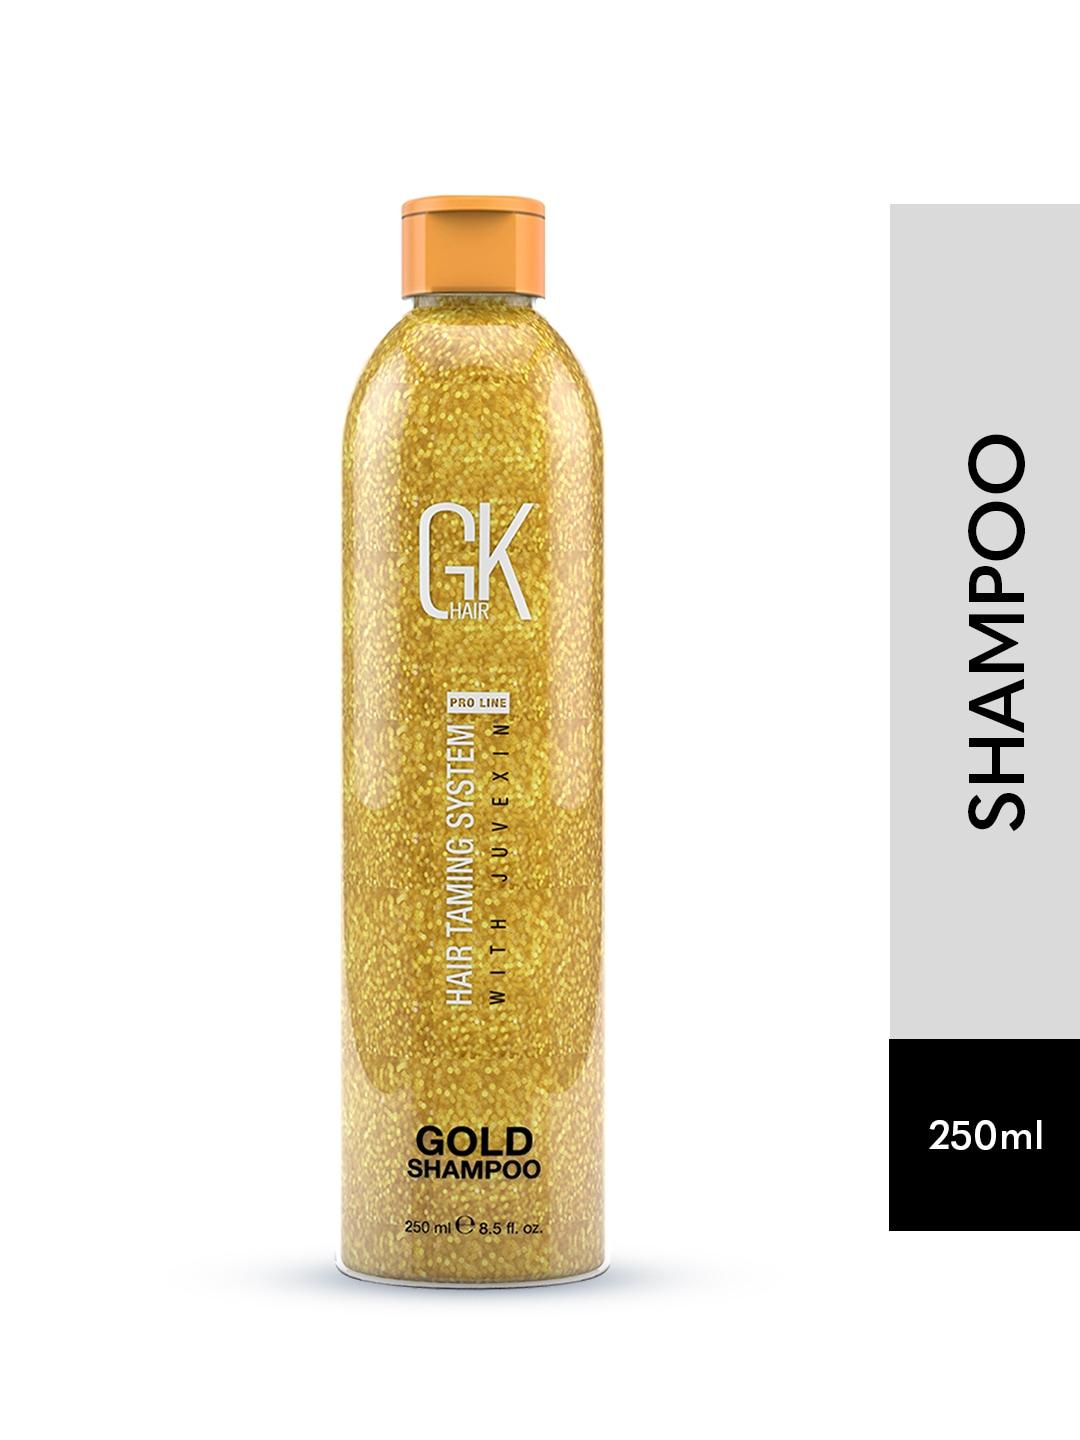 gk hair pro line hair taming system with juvexin gold global keratin shampoo 250 ml